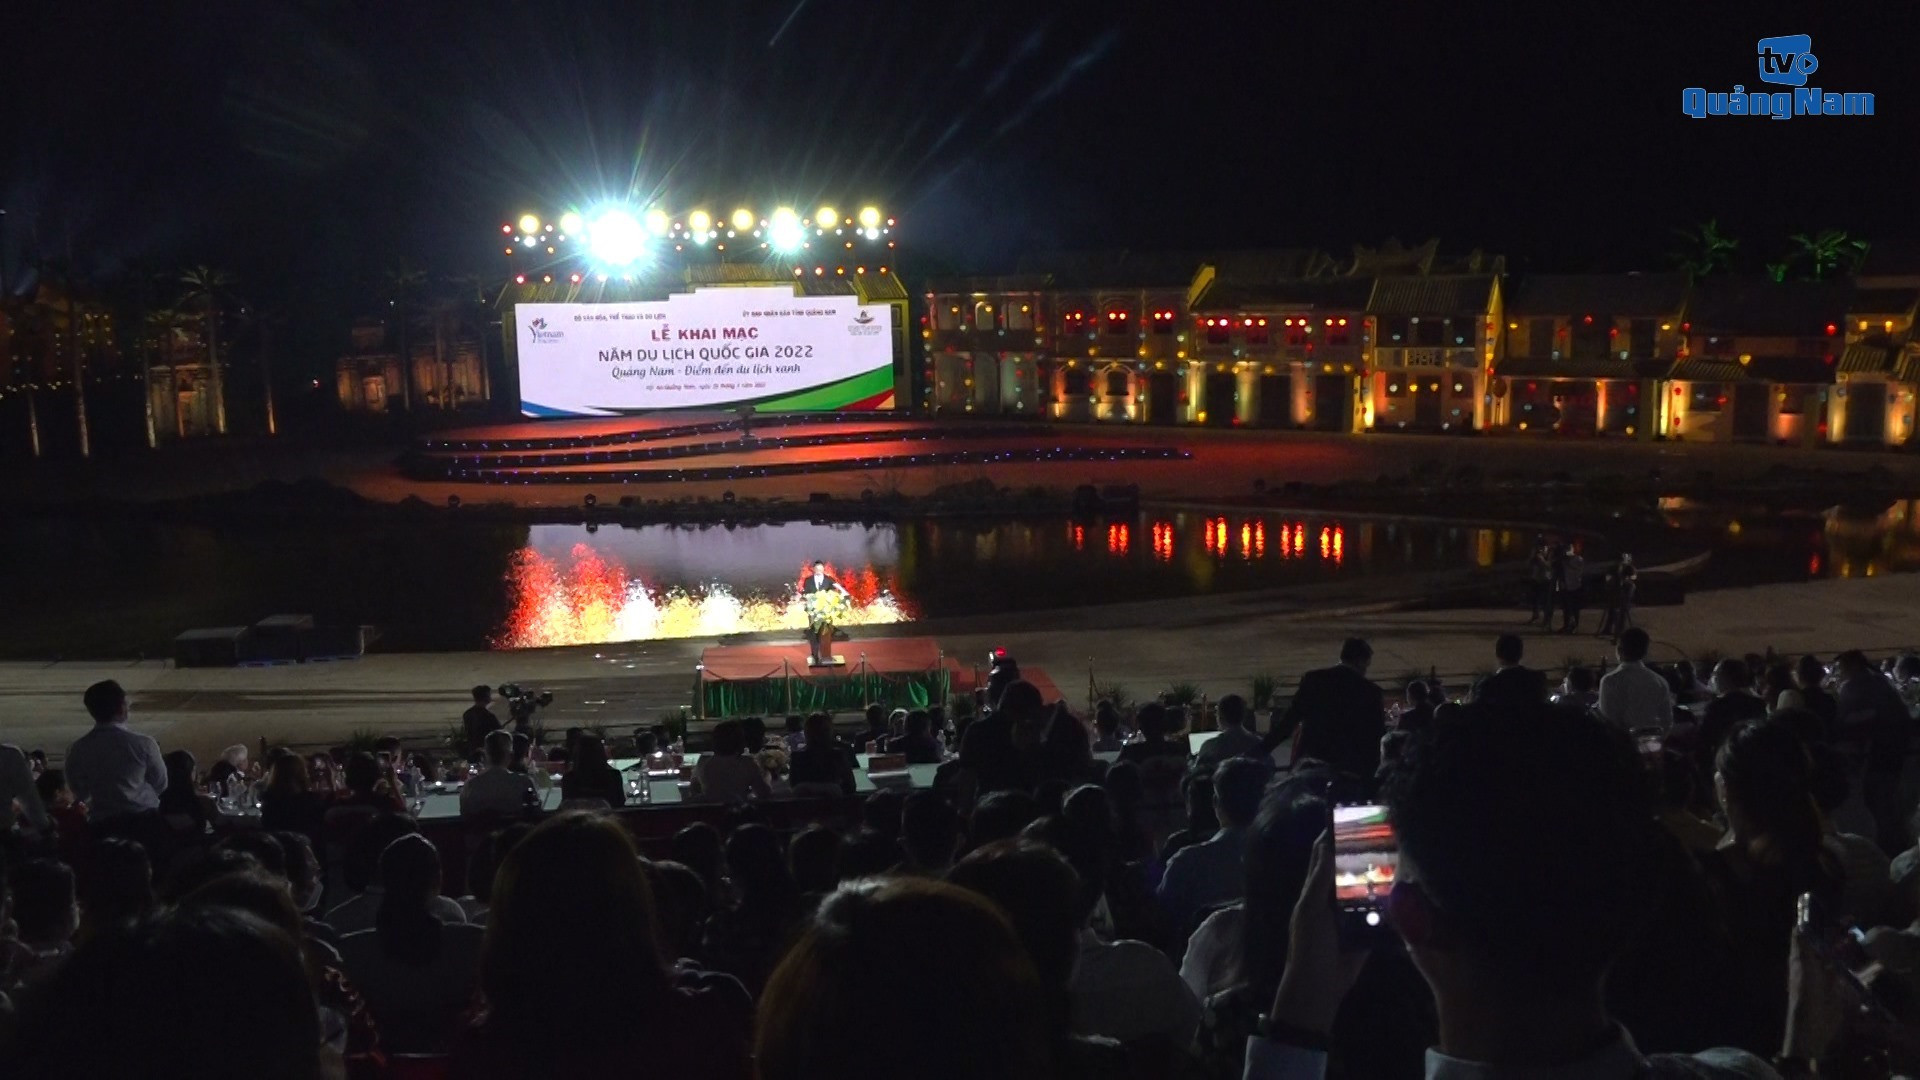 Opening ceremony of the Vietnam National Tourism Year 2022